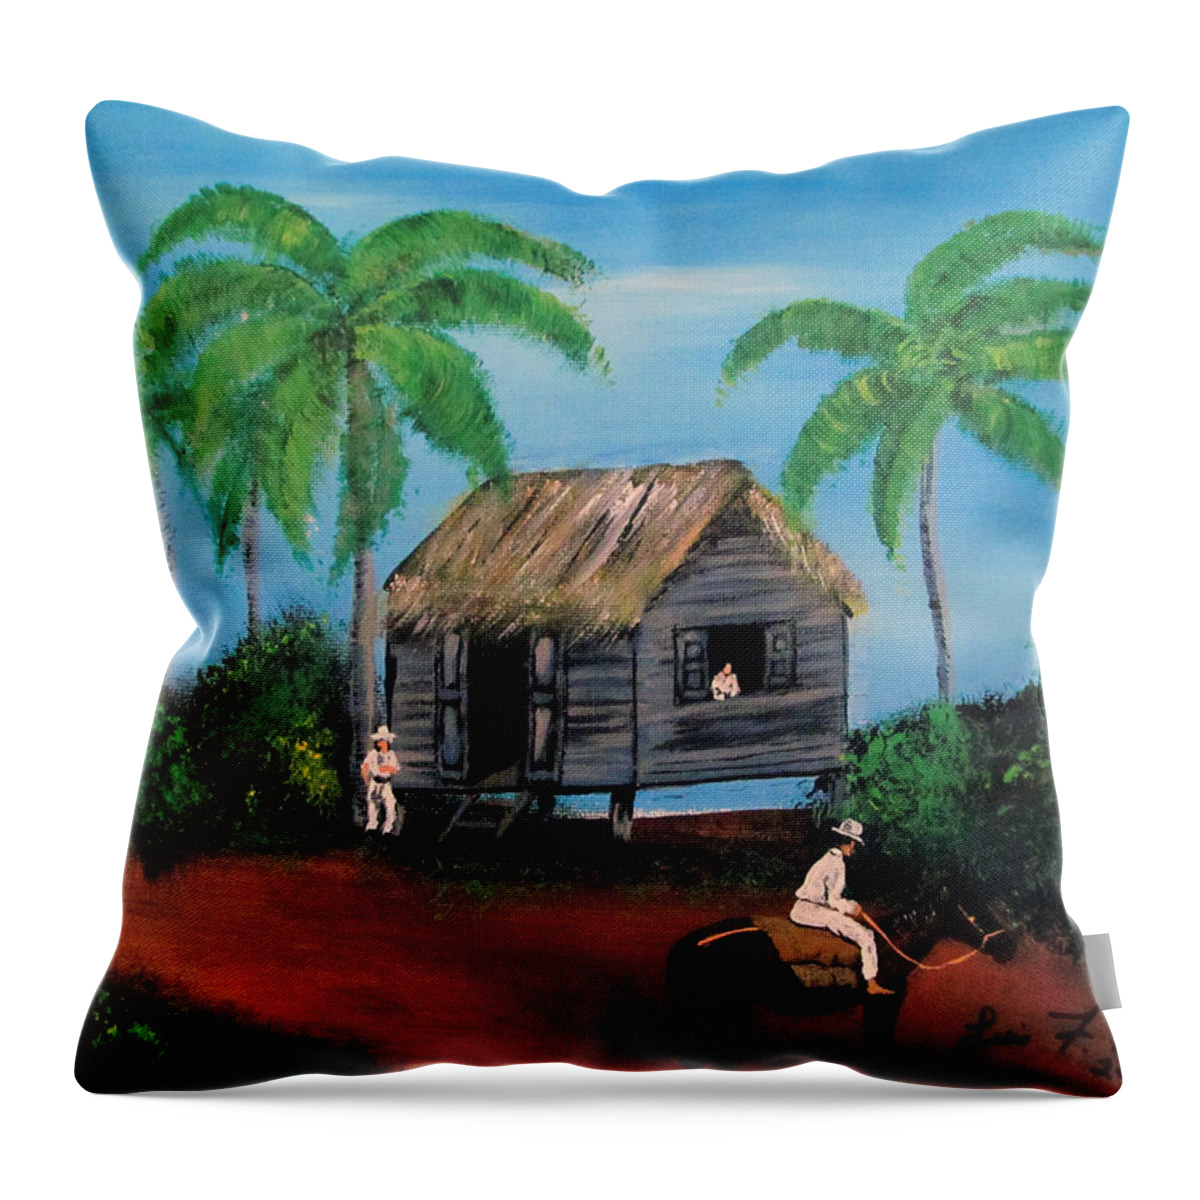 Bohio Throw Pillow featuring the painting El Bohio by Luis F Rodriguez